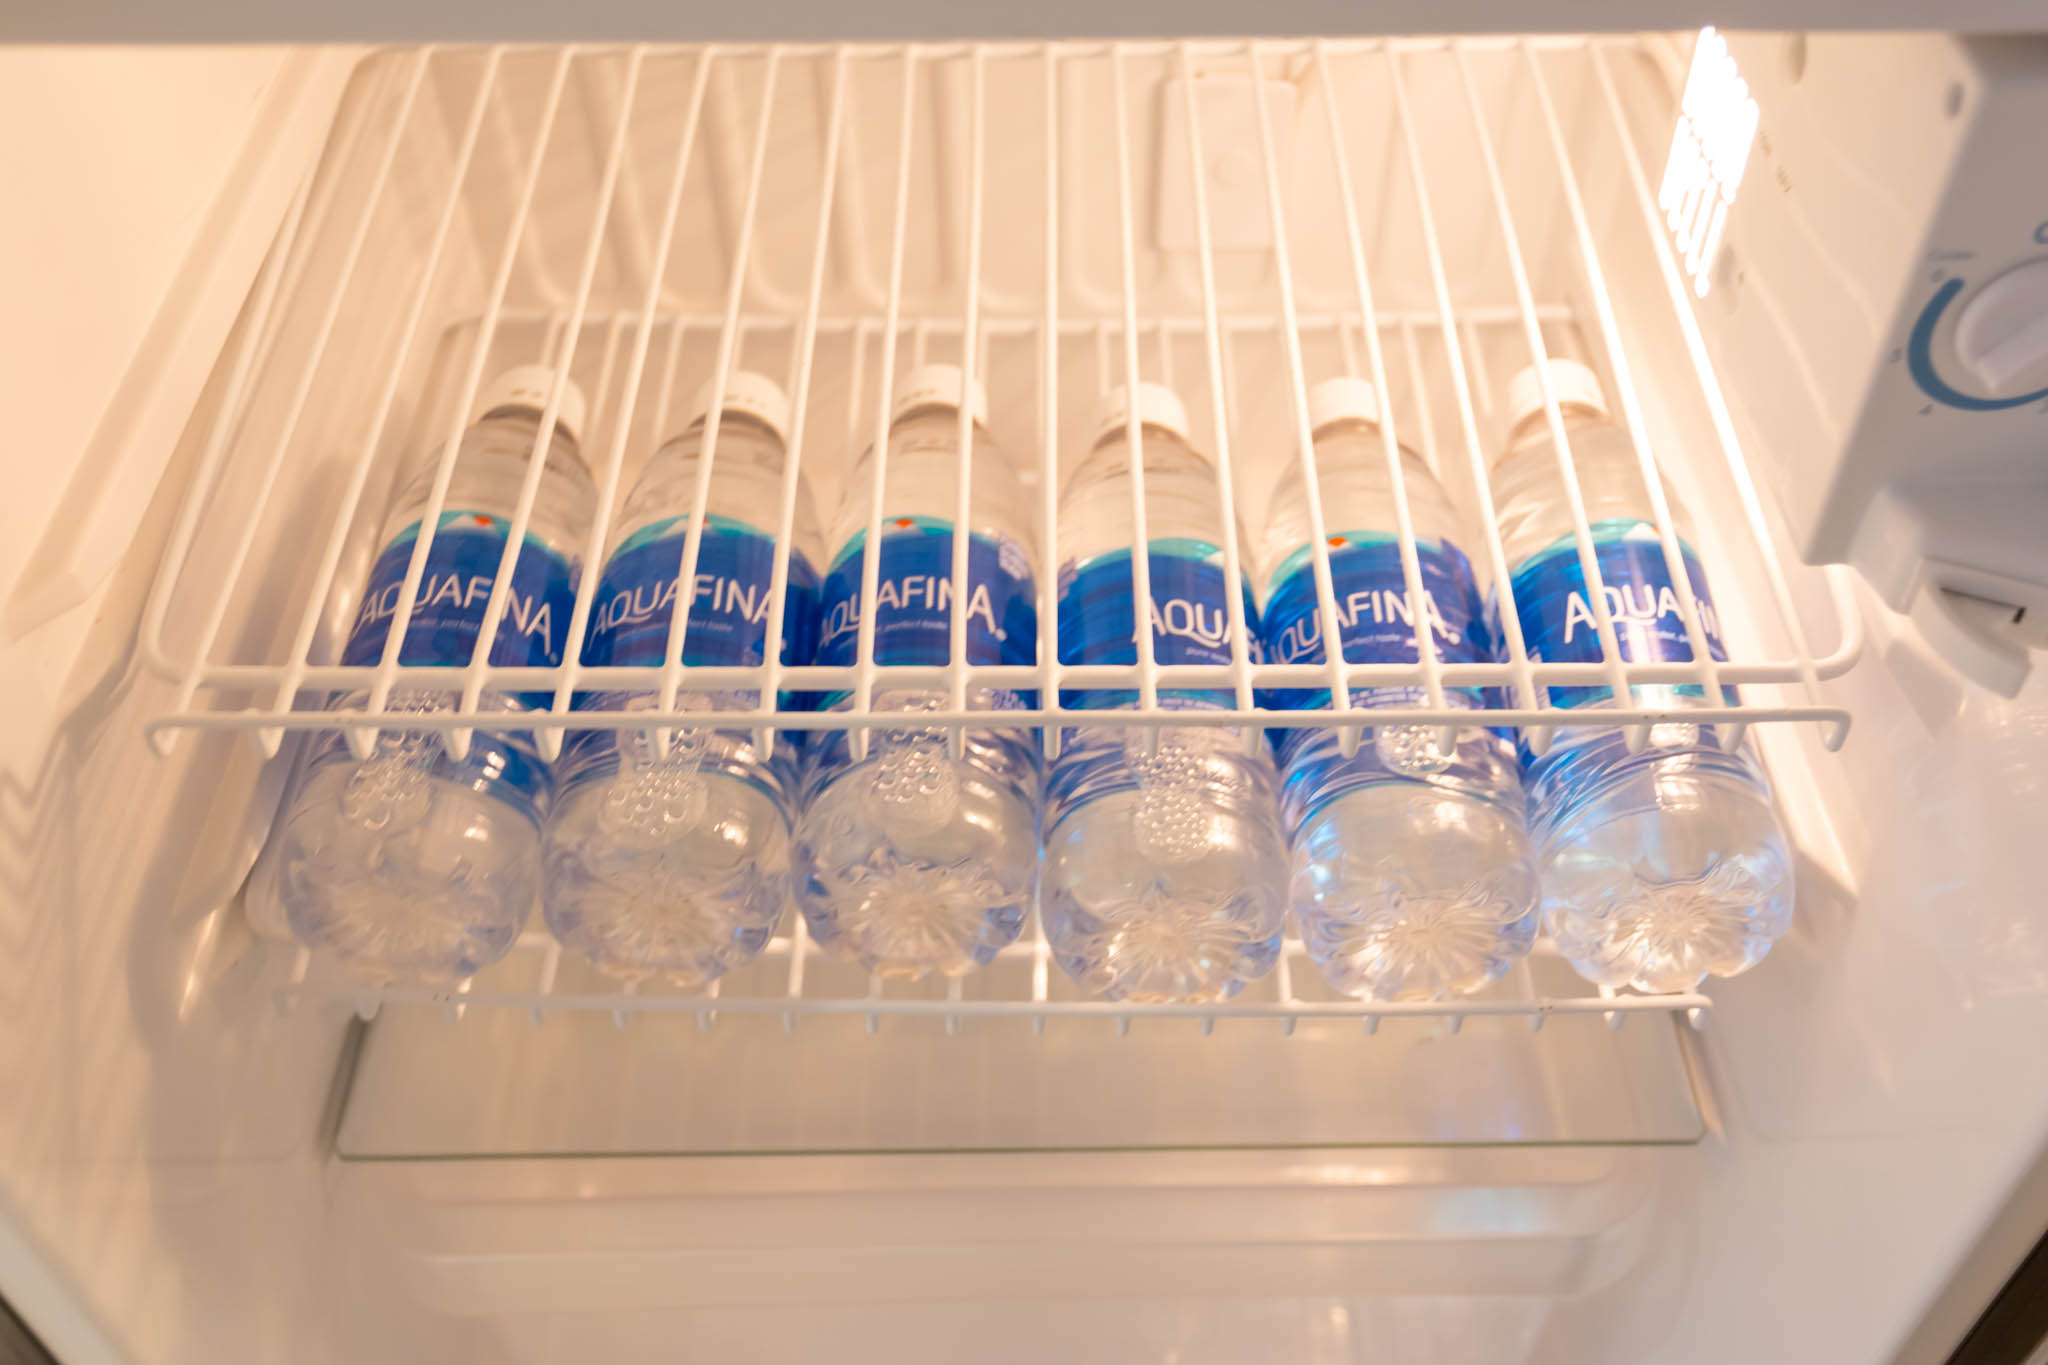 a row of water bottles in a refrigerator